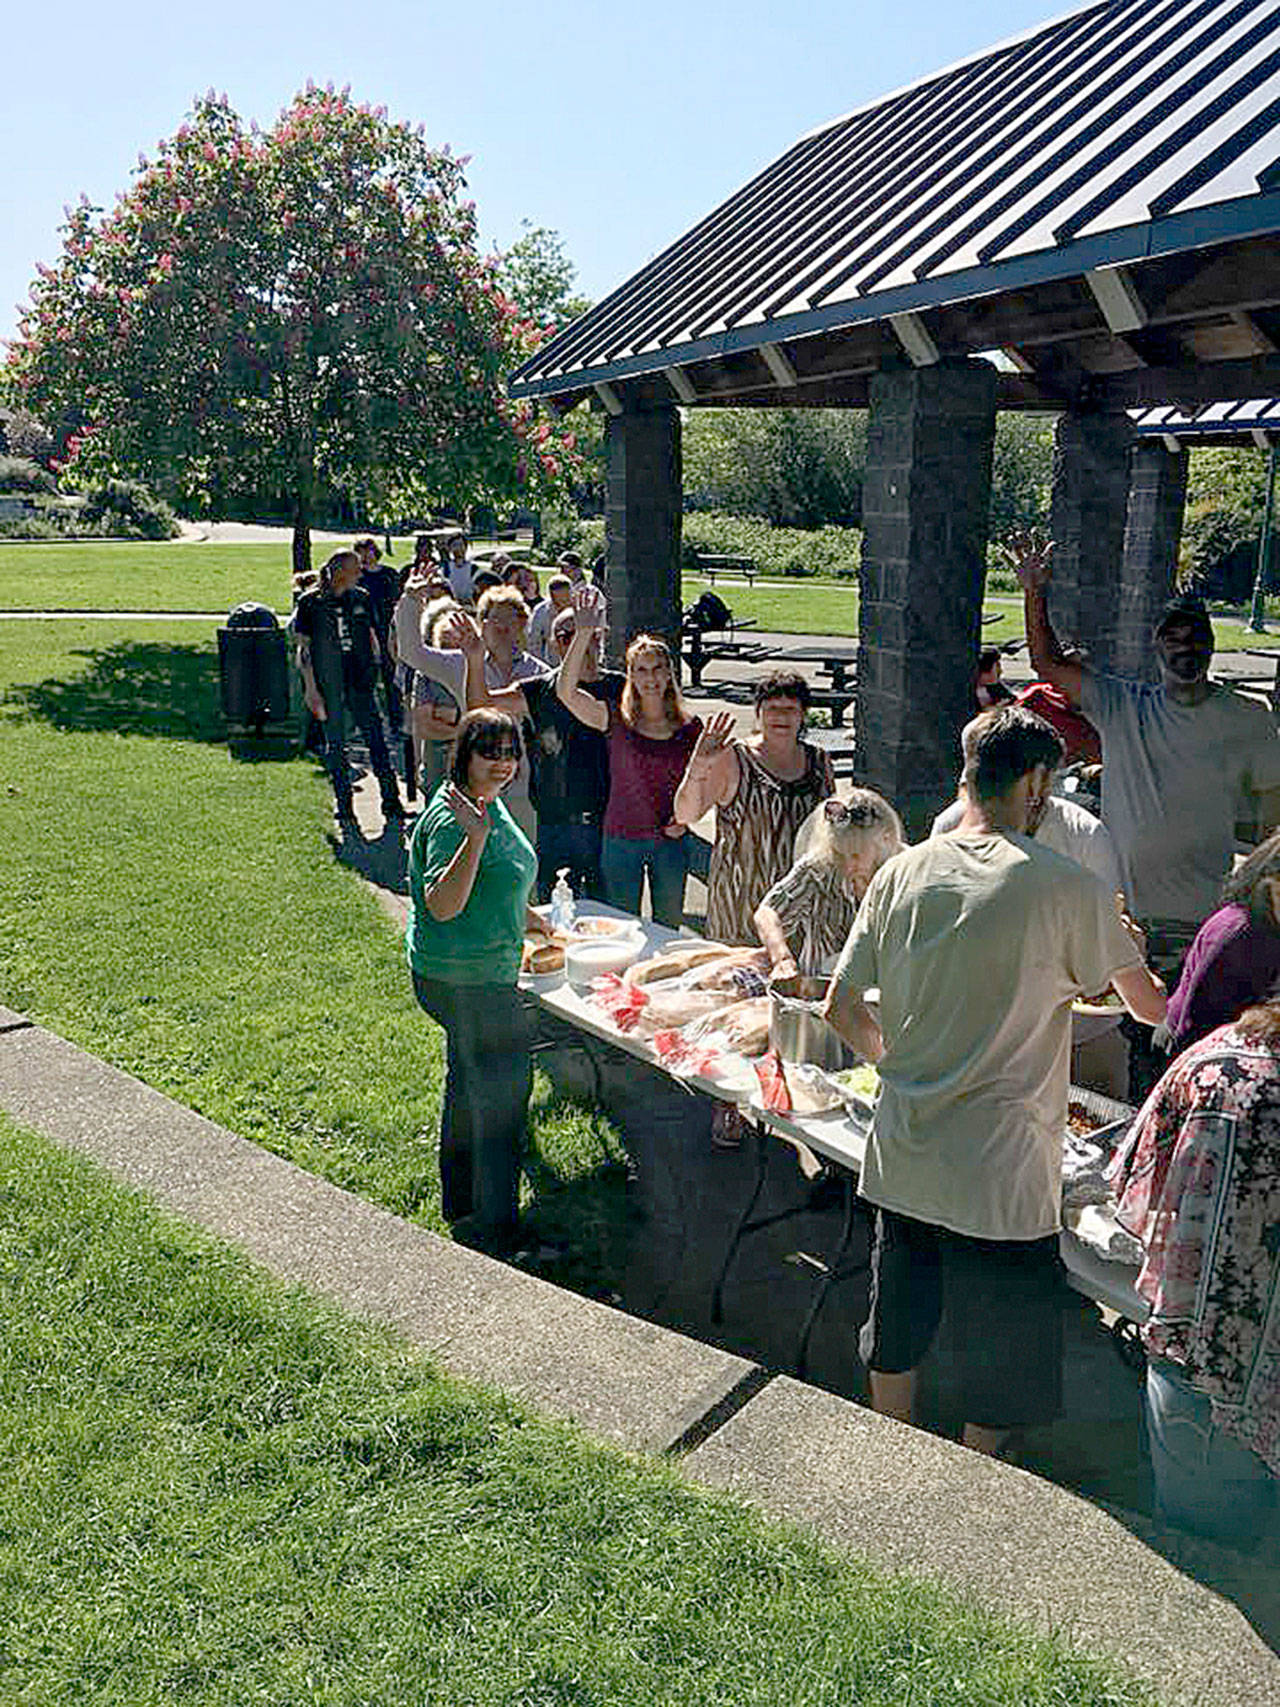 &lt;em&gt;About 50-60 people attend the monthly picnics for the Bremerton homeless community.&lt;/em&gt;                                Bremerton Homeless Community Coalition Facebook page